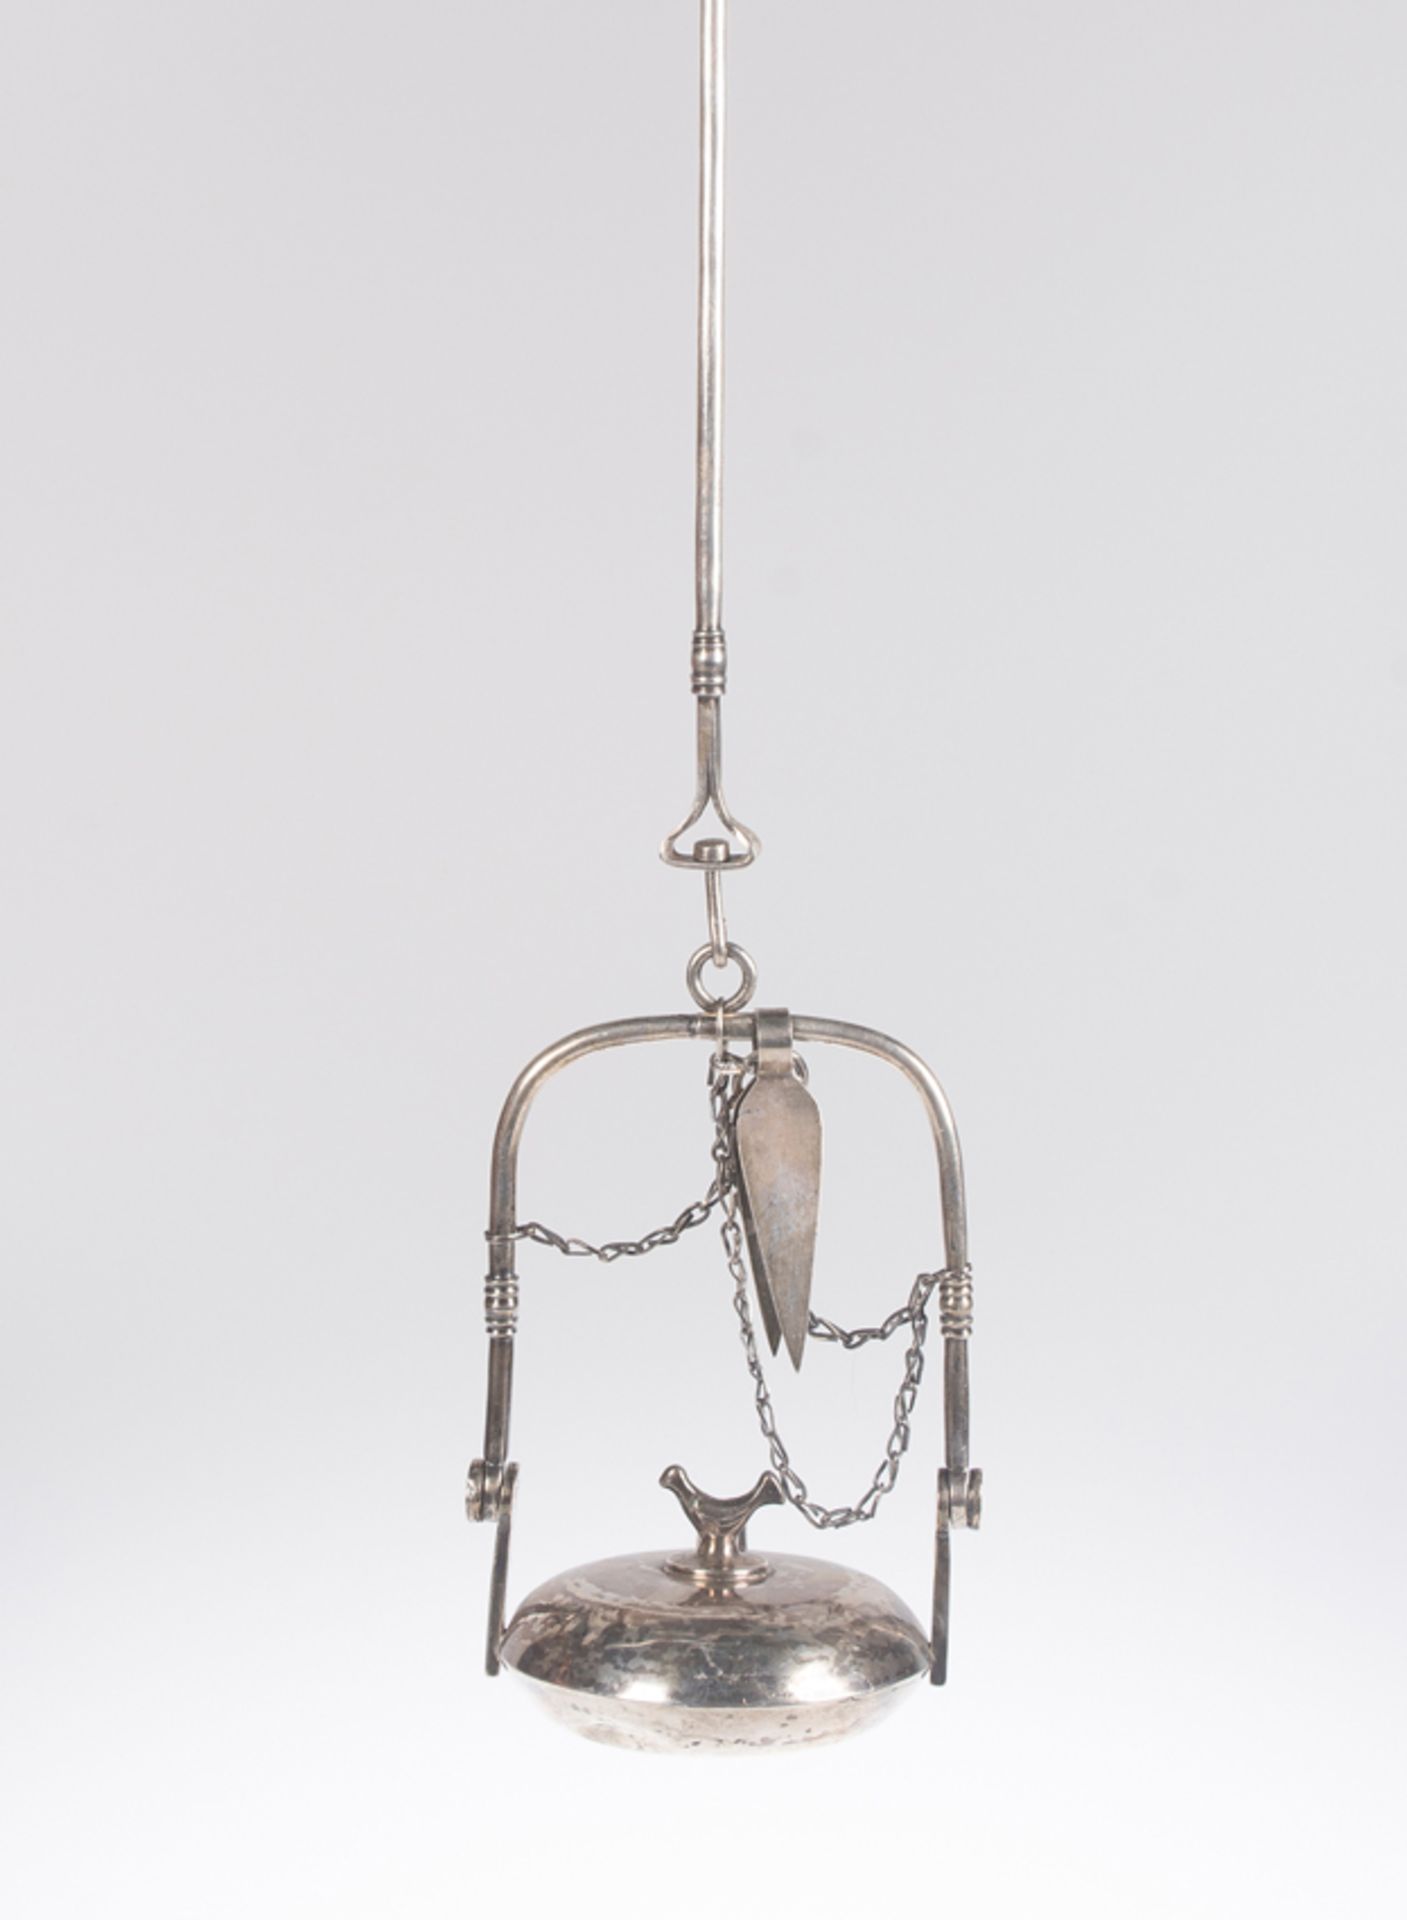 Silver mine lamp. Colonial. 18th century.